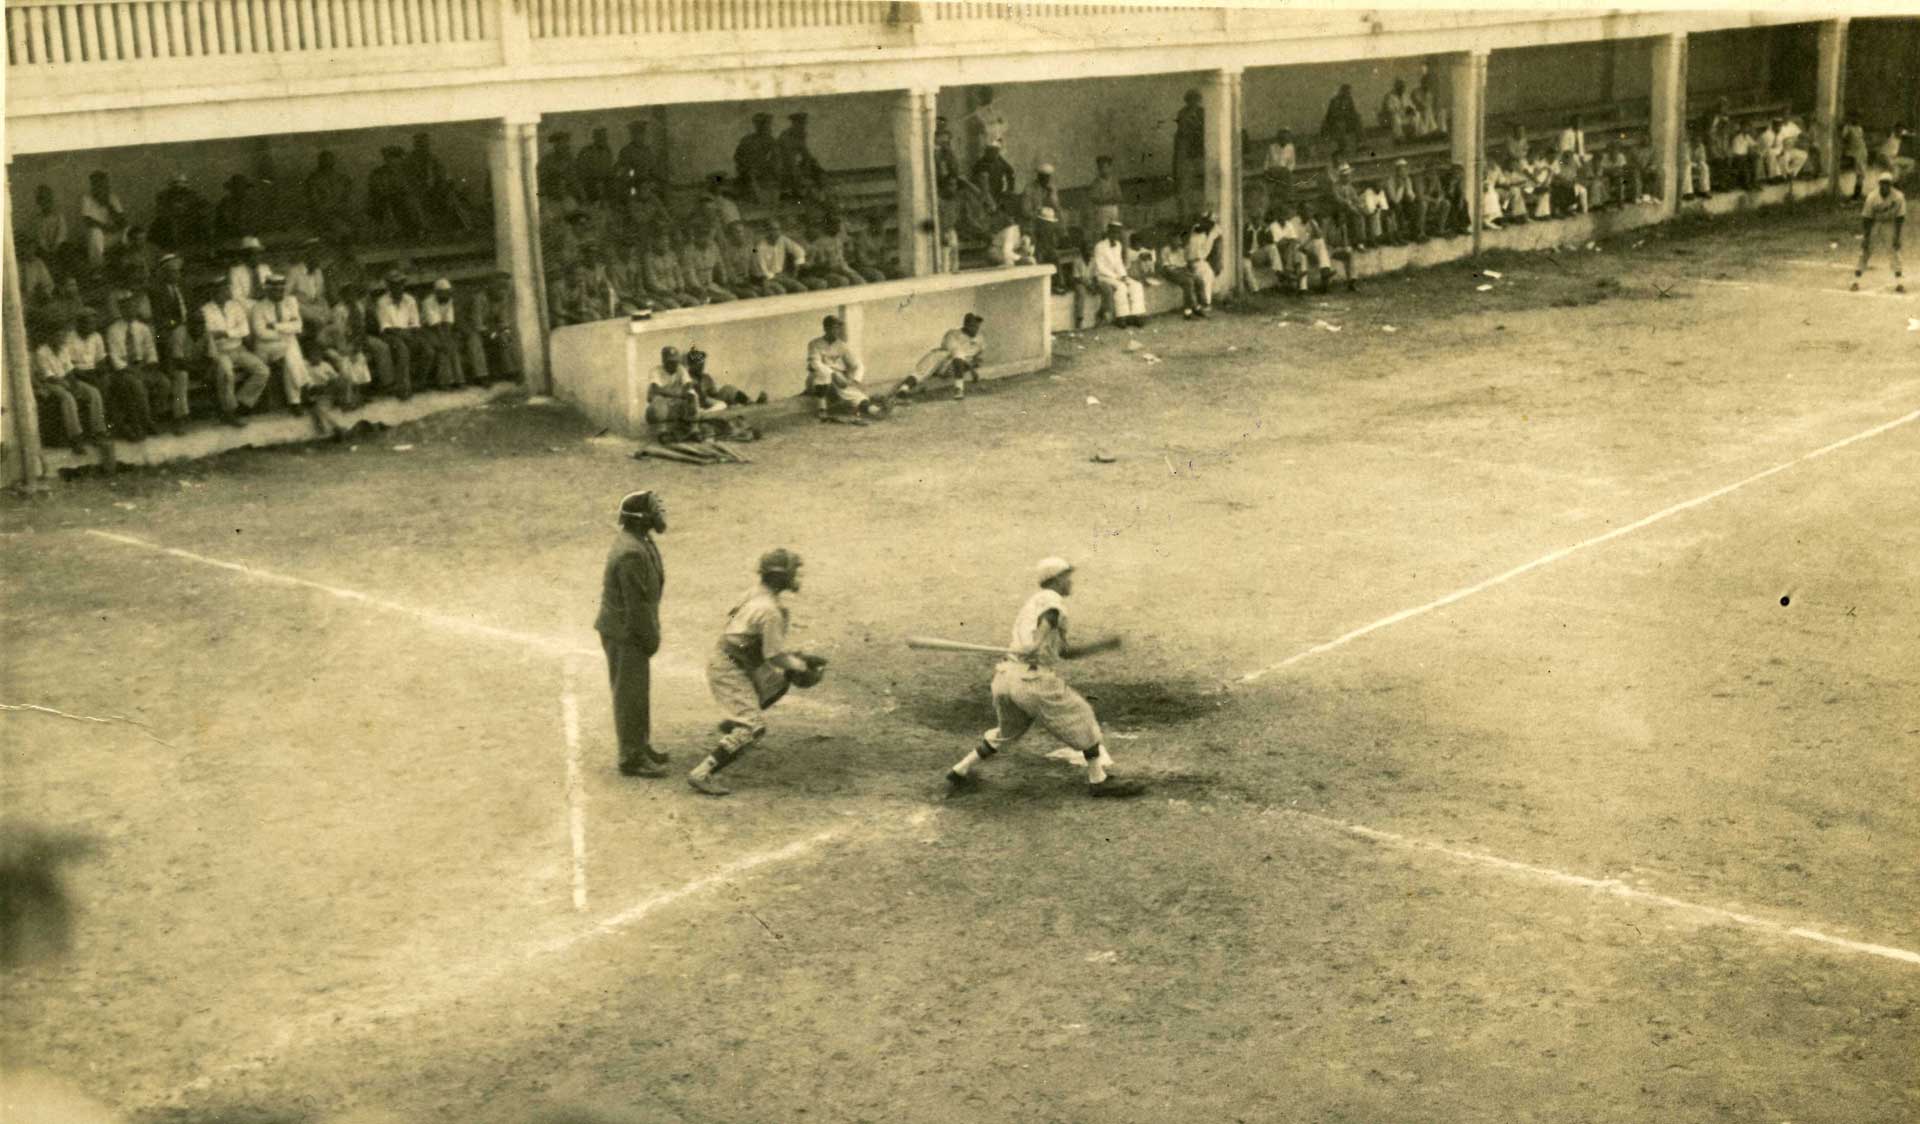 Game action in Cuba, 1937.